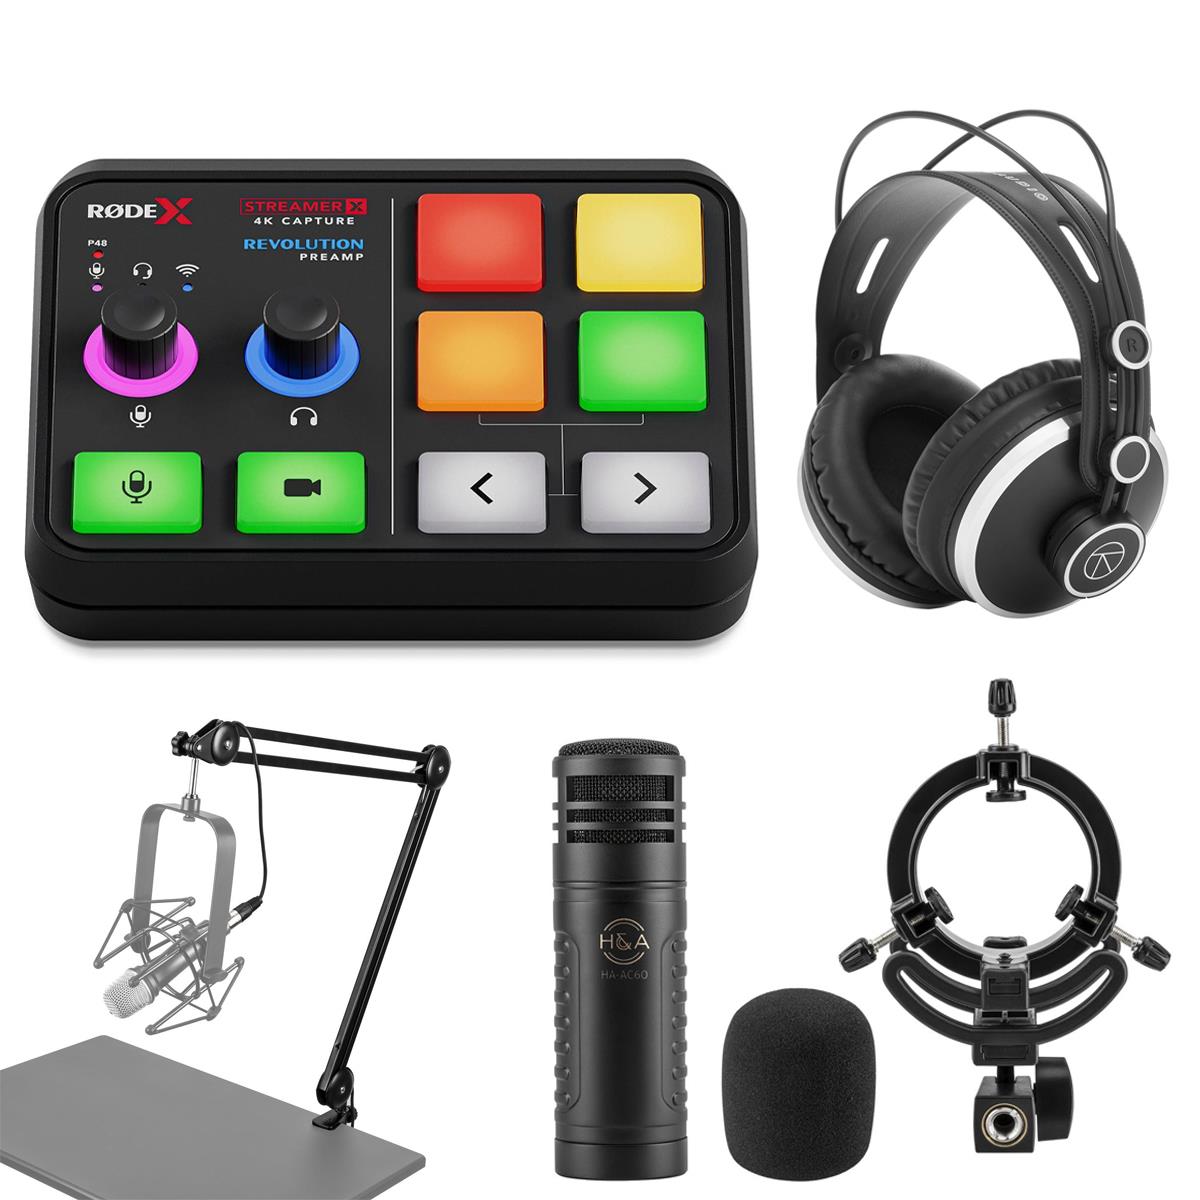 Image of Rode X Streamer X Audio Interface and Video Streaming Console Podcasting Kit